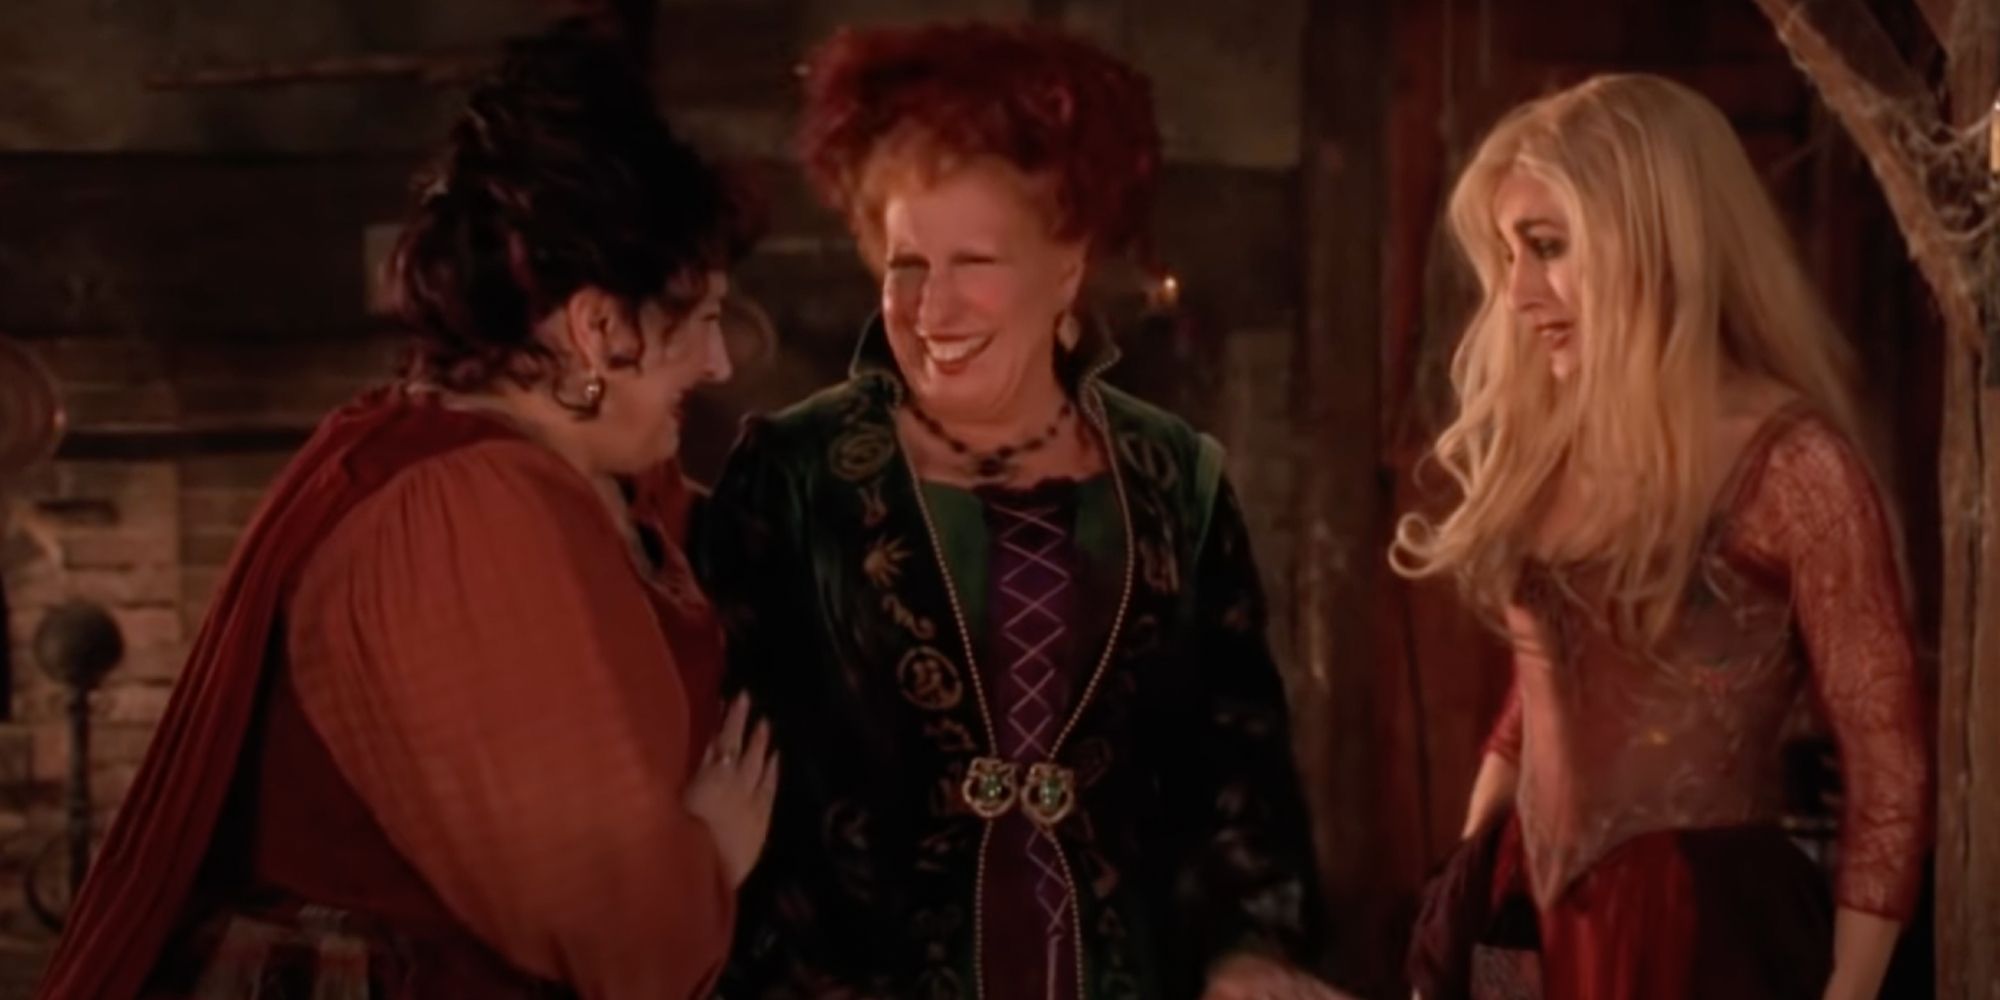 Winifred crying to Mary and Sarah in Hocus Pocus